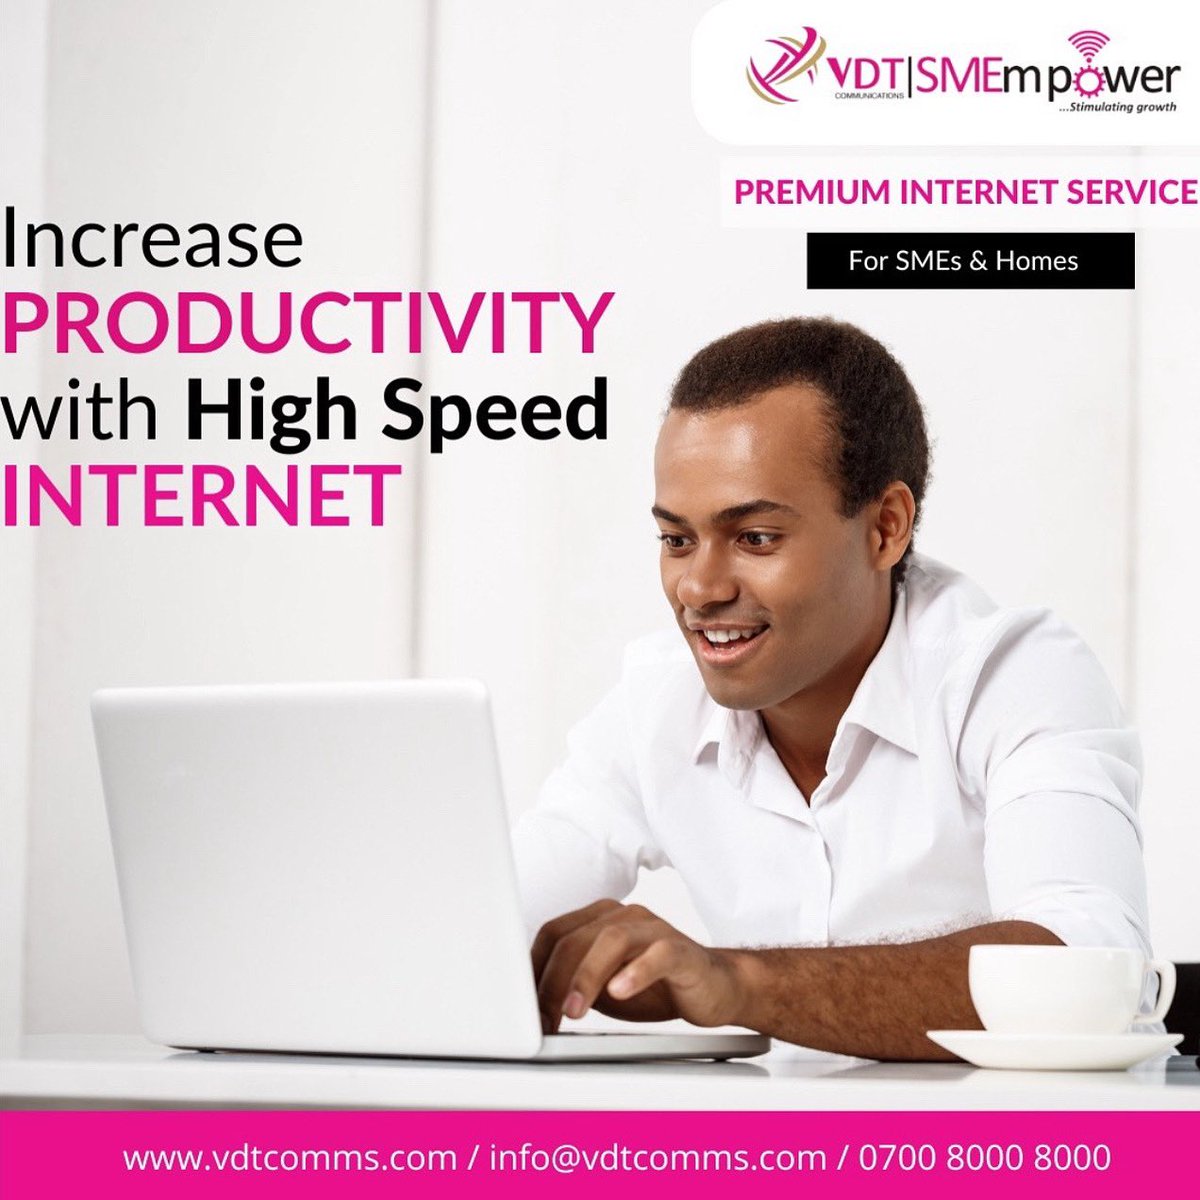 Having a stable connection to the internet is paramount in building a business today.
Find new customers, ensure optimal collaboration with your team and get things done seamlessly when you connect with US!

#vdtcomms #broadbandinternet #productivity #highspeedinternet